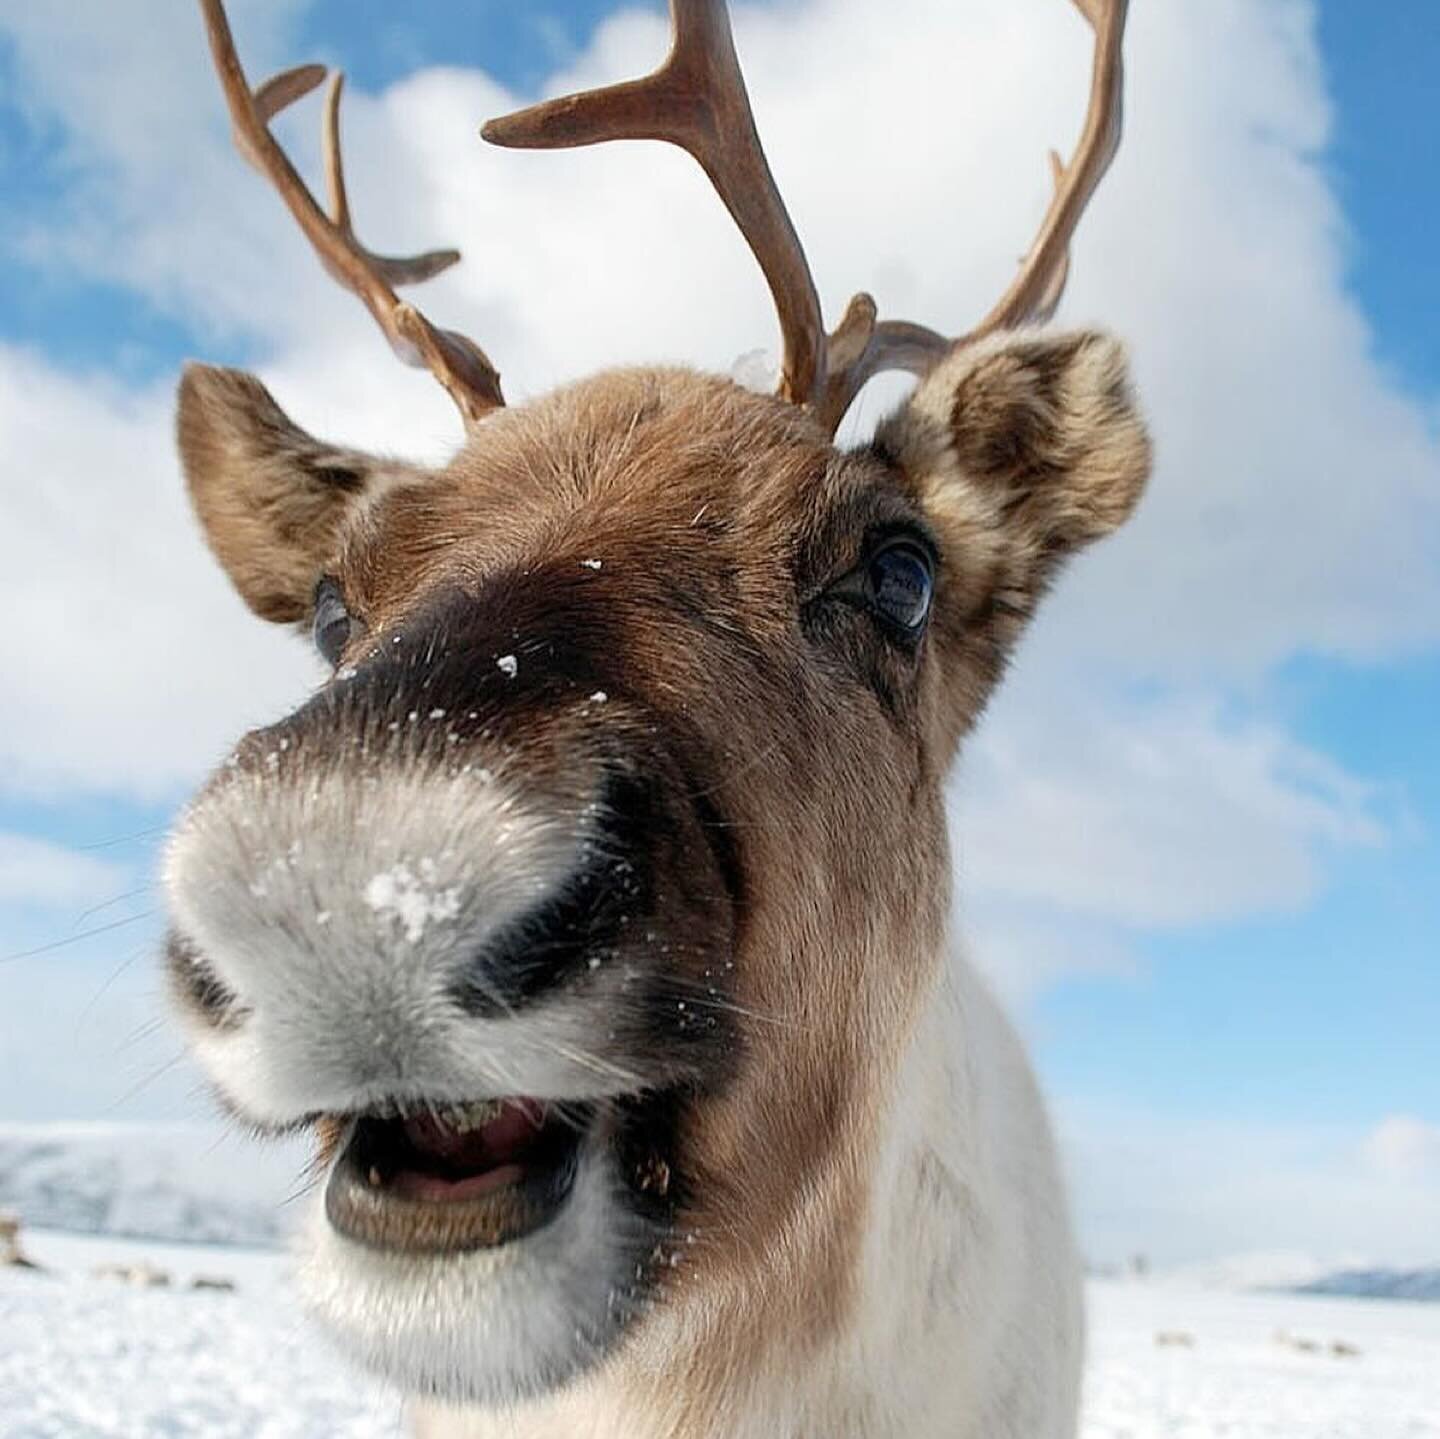 SMILING WITH HOLIDAY CHEER 🎊 

1. Reindeer have become closely associated with Christmas since the 1800s, with 9 reindeer pulling Santa's sled around the world 🛷
2. Polar Bear- This amazing bear's fur is commonly associated with the snow, providing